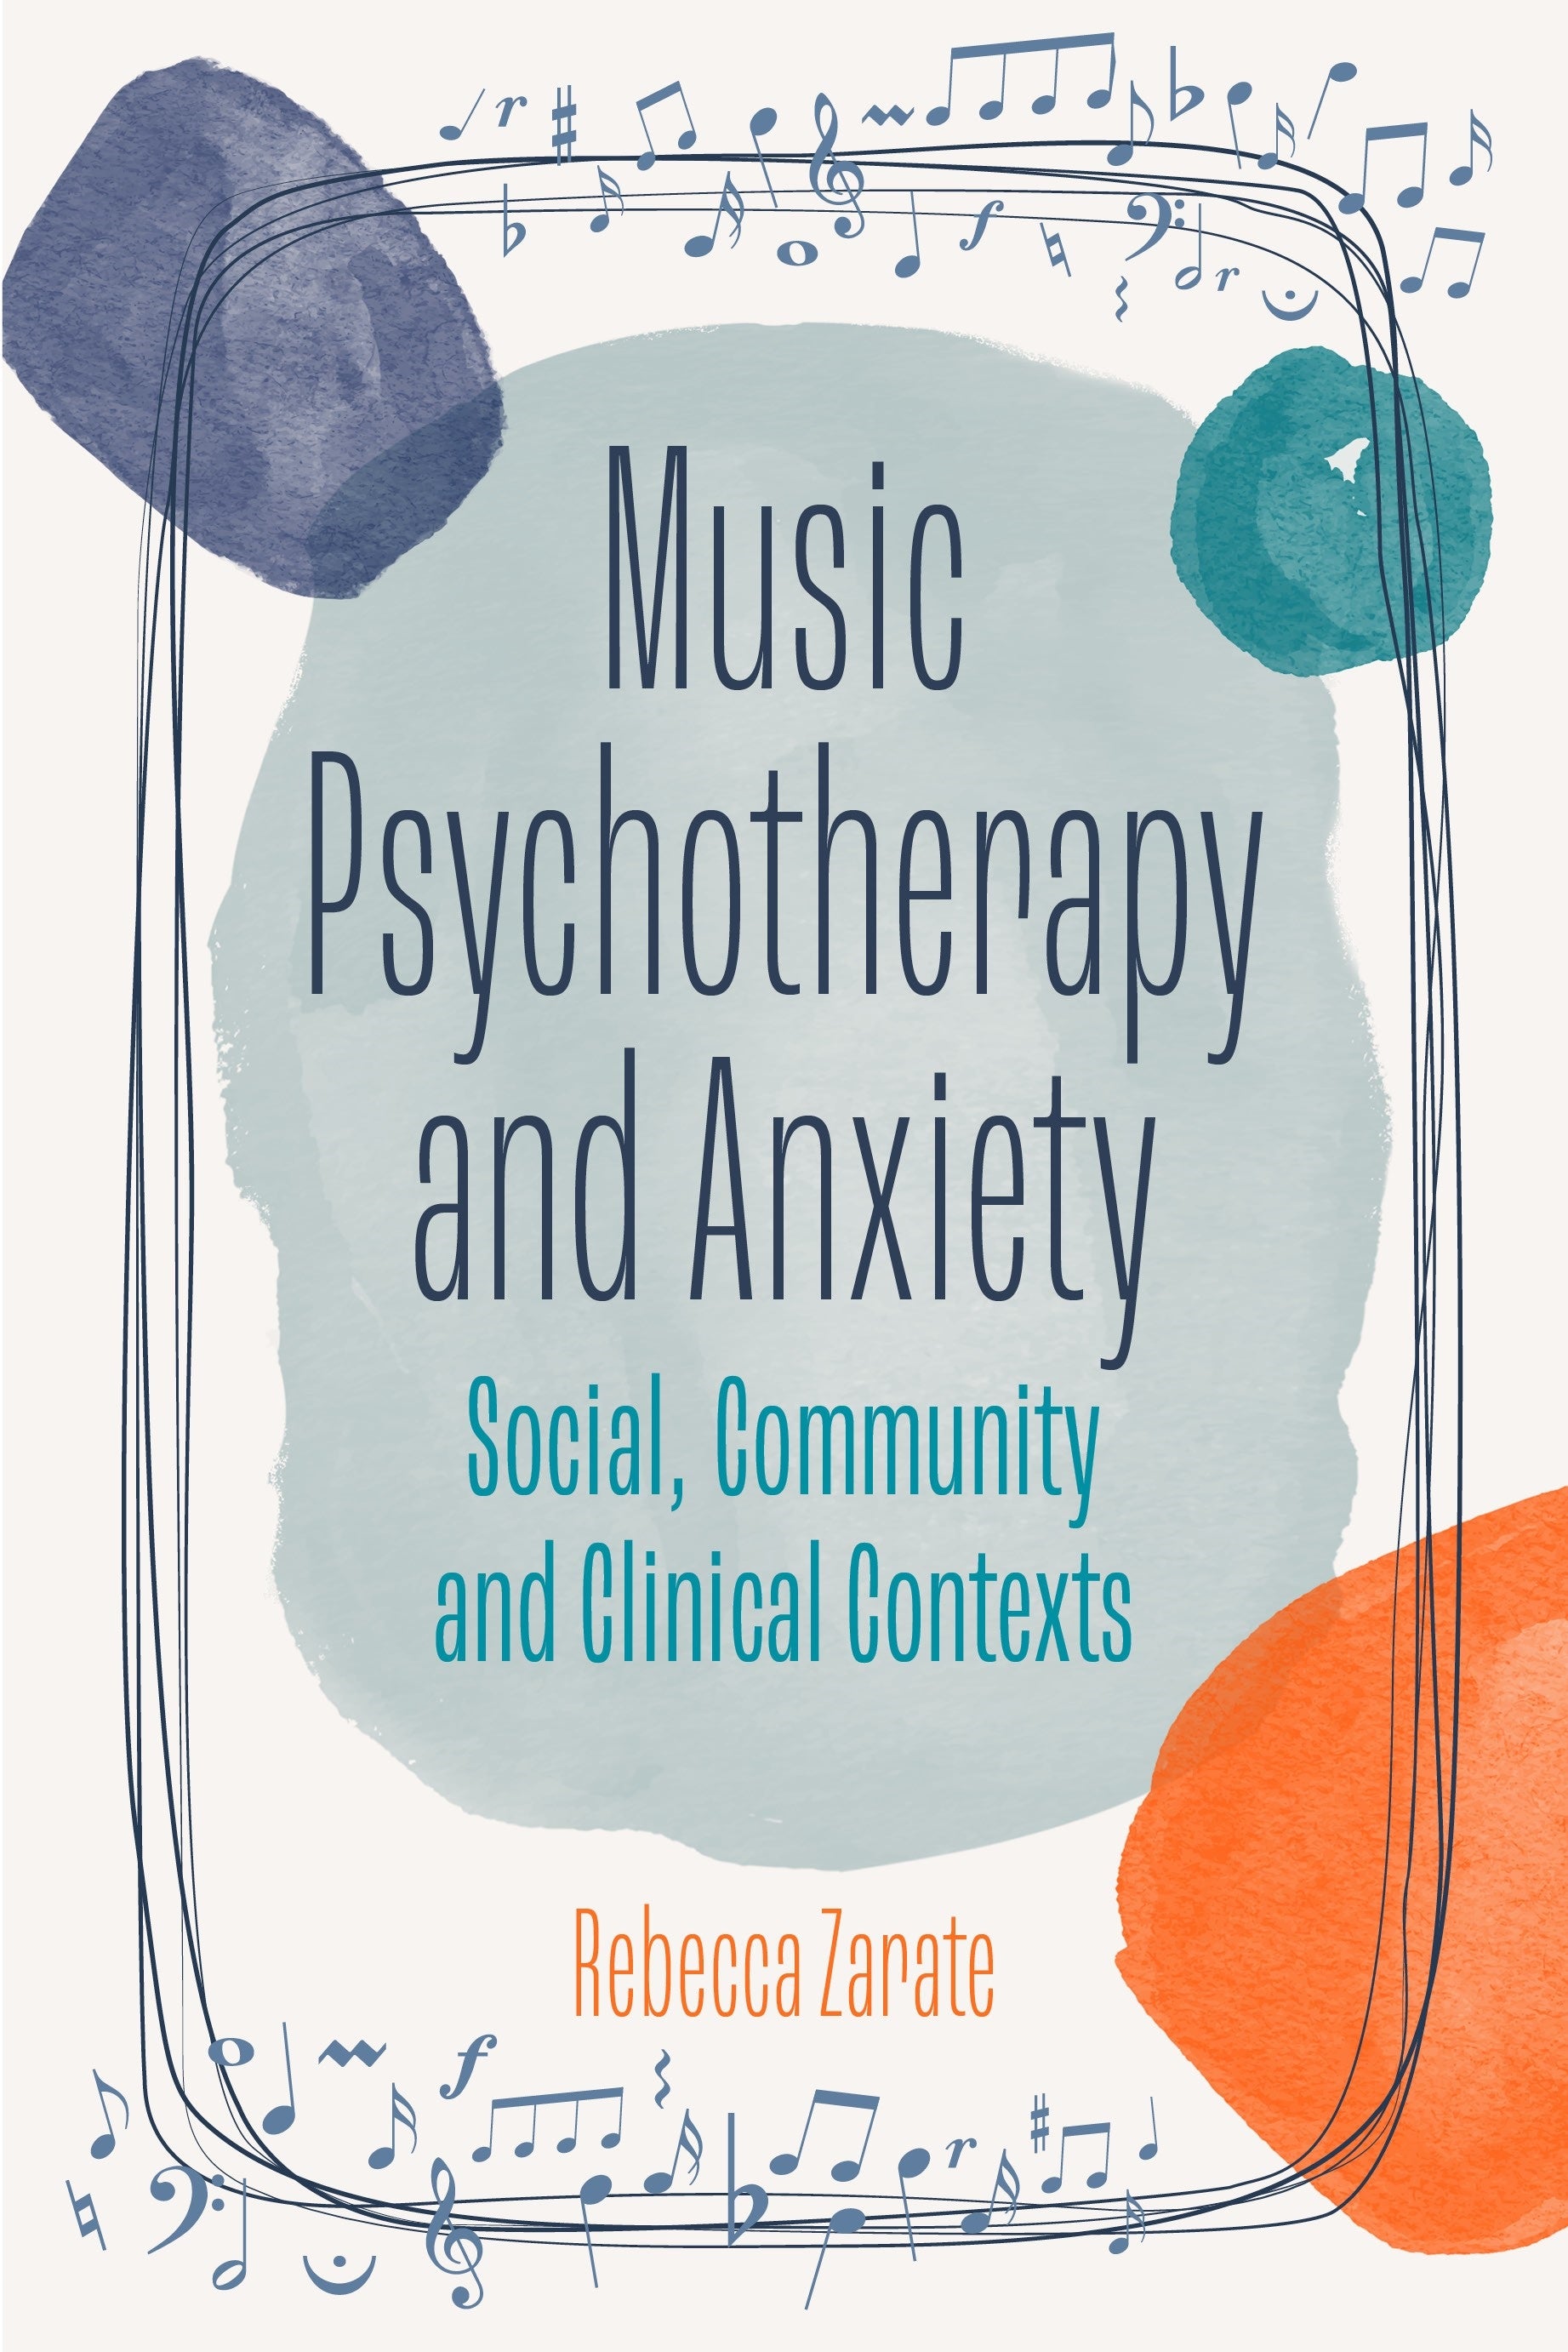 Music Psychotherapy and Anxiety by Rebecca Zarate